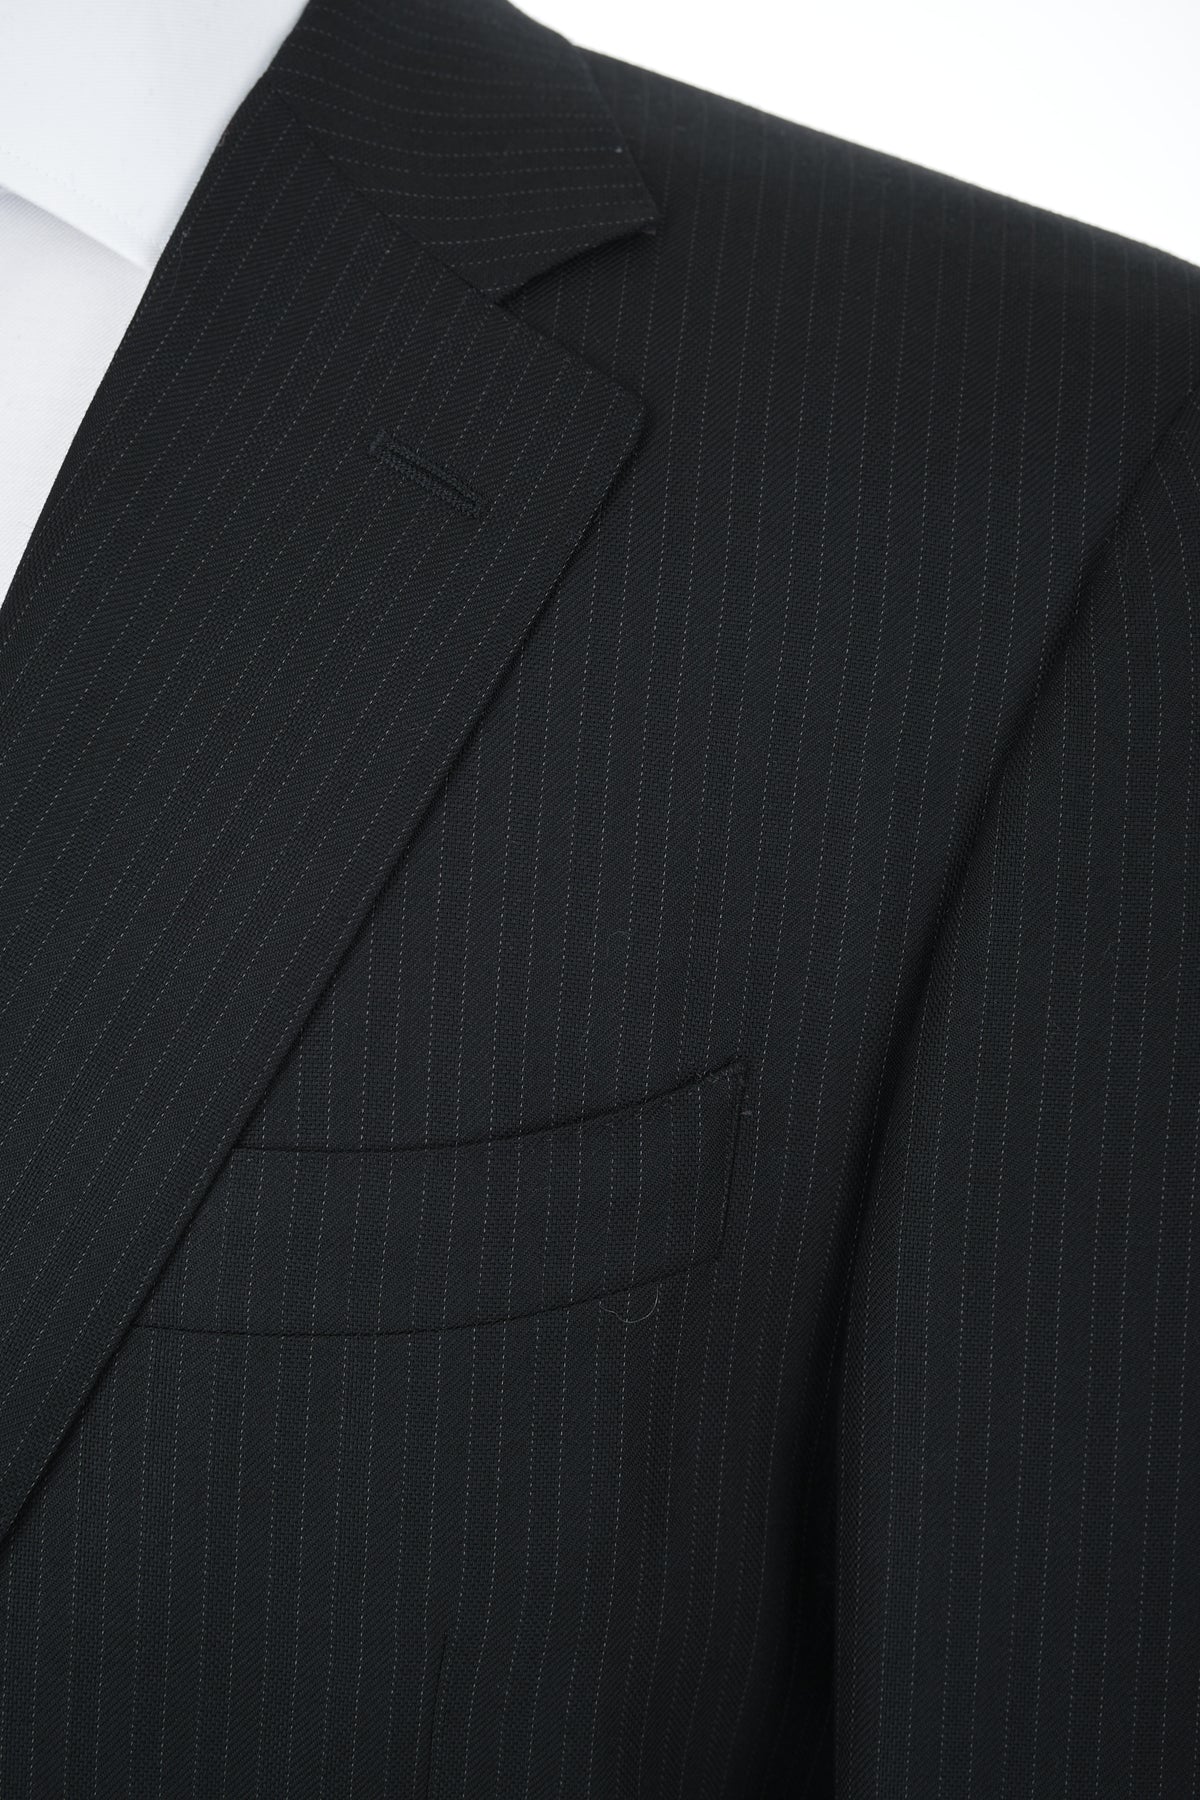 Canali 1934 Mens Black Pinstriped 44R Drop 6 100% Wool 2 Piece Suit